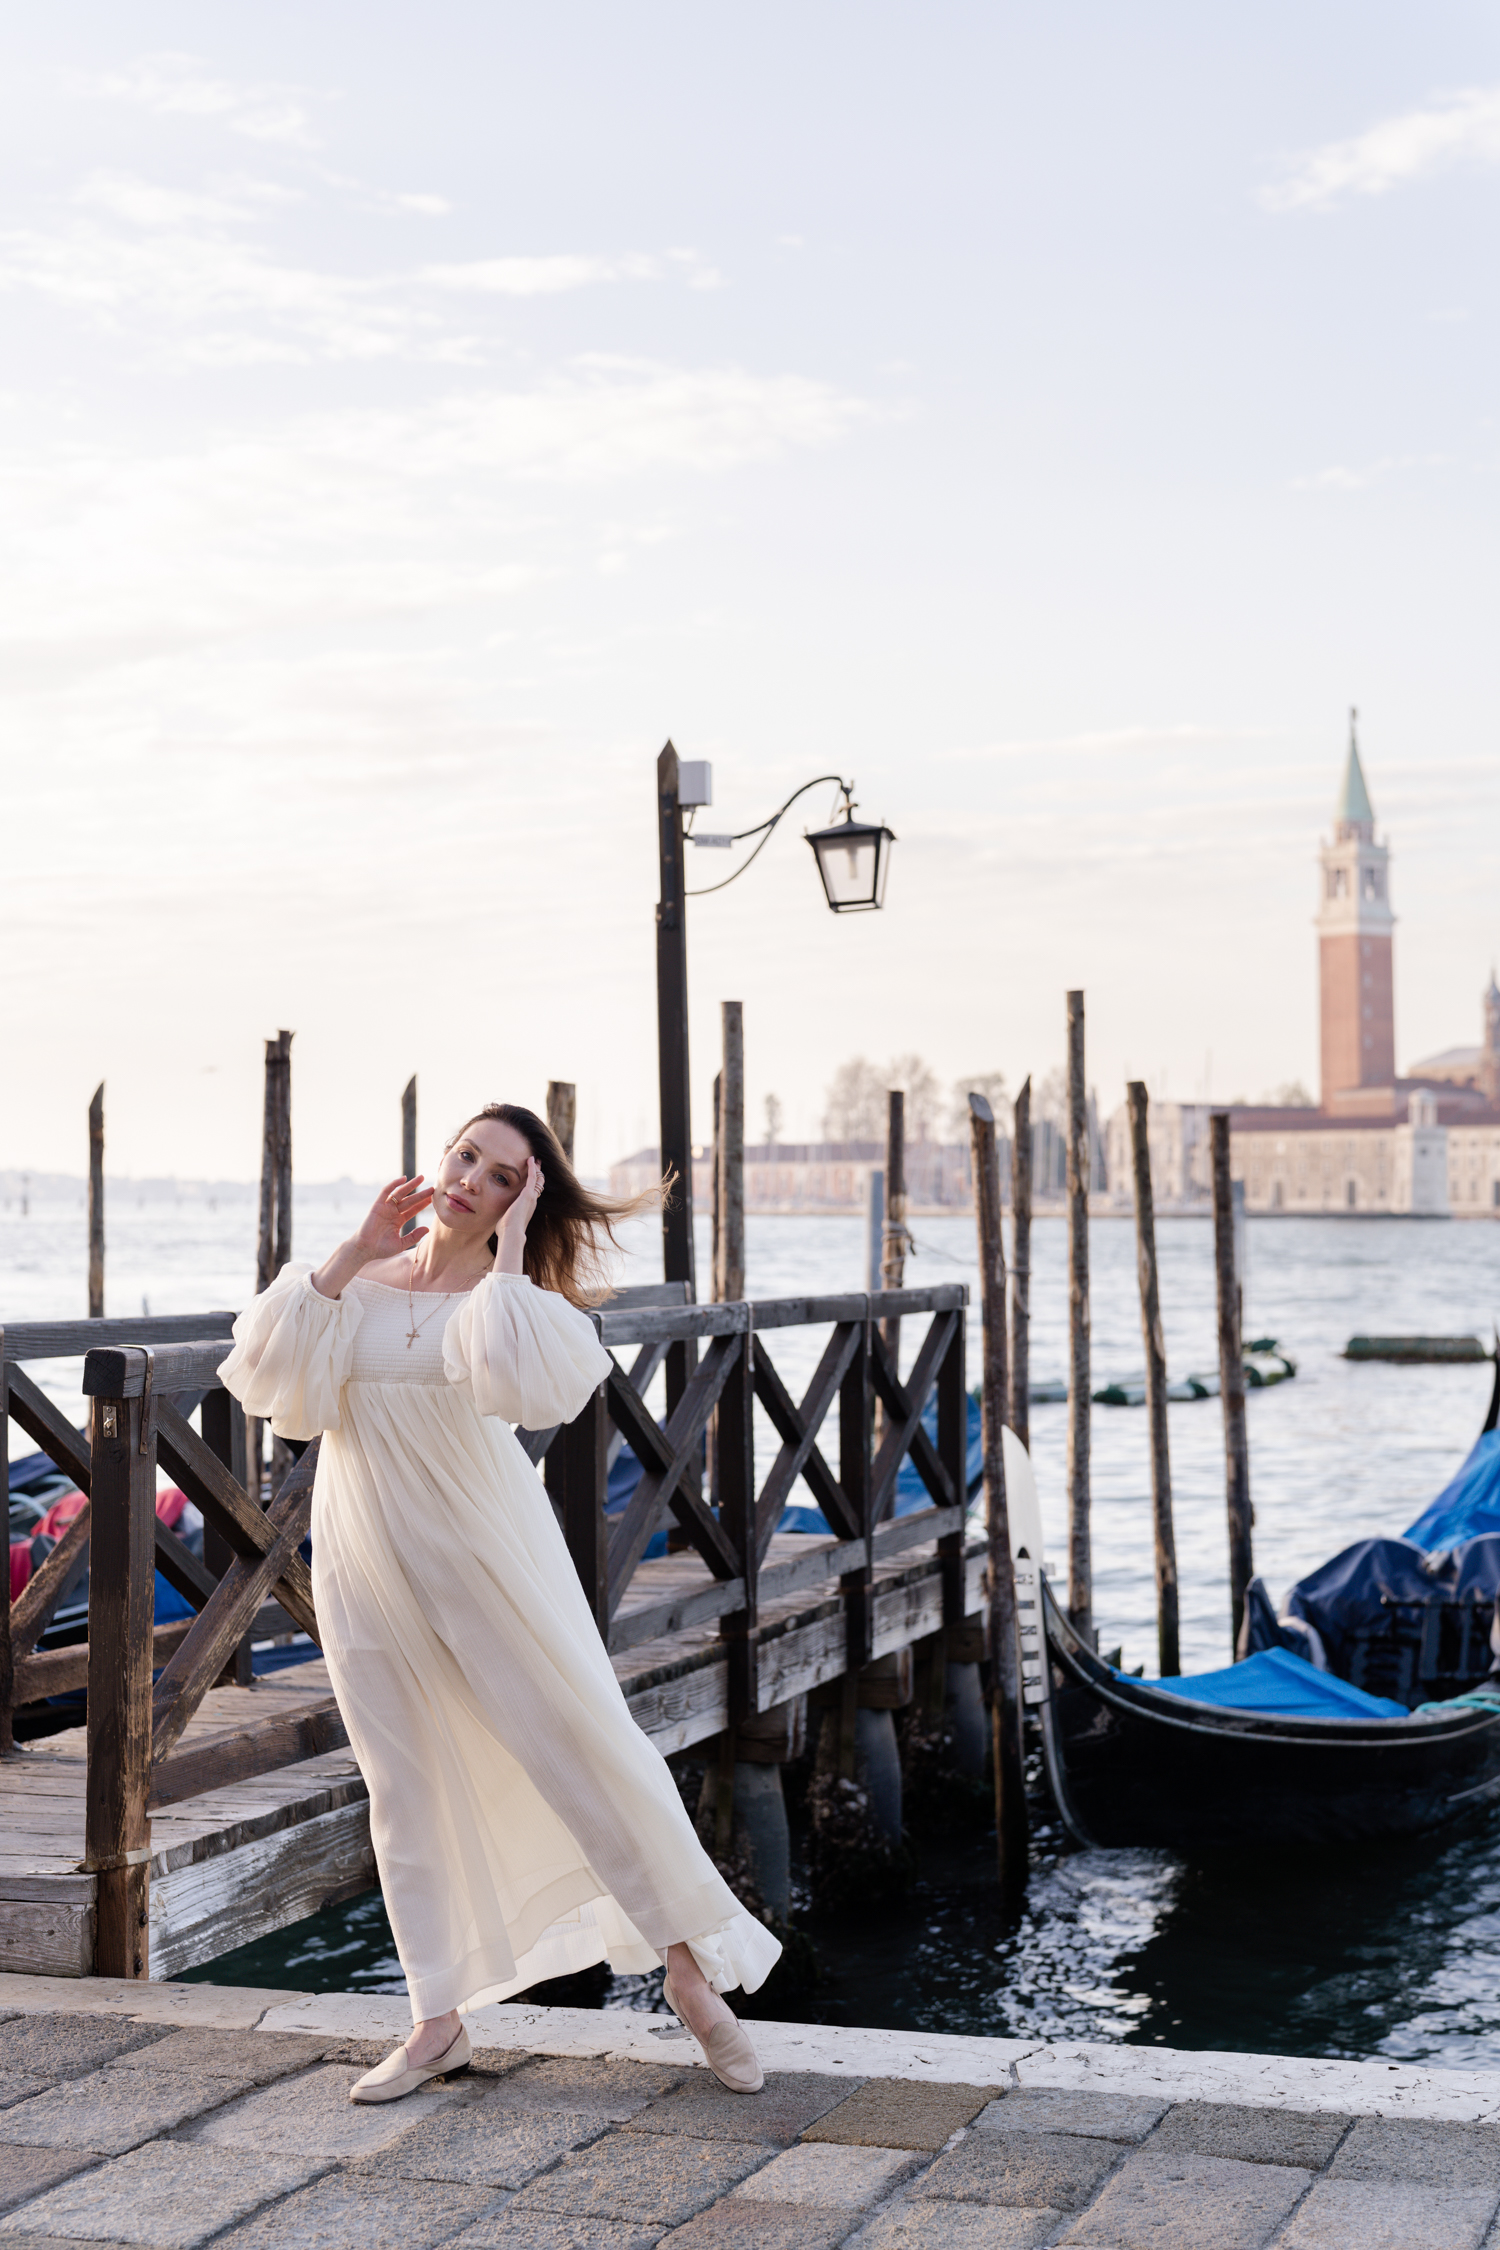 Venice photographer for a portrait or blogger photoshoot in Venice